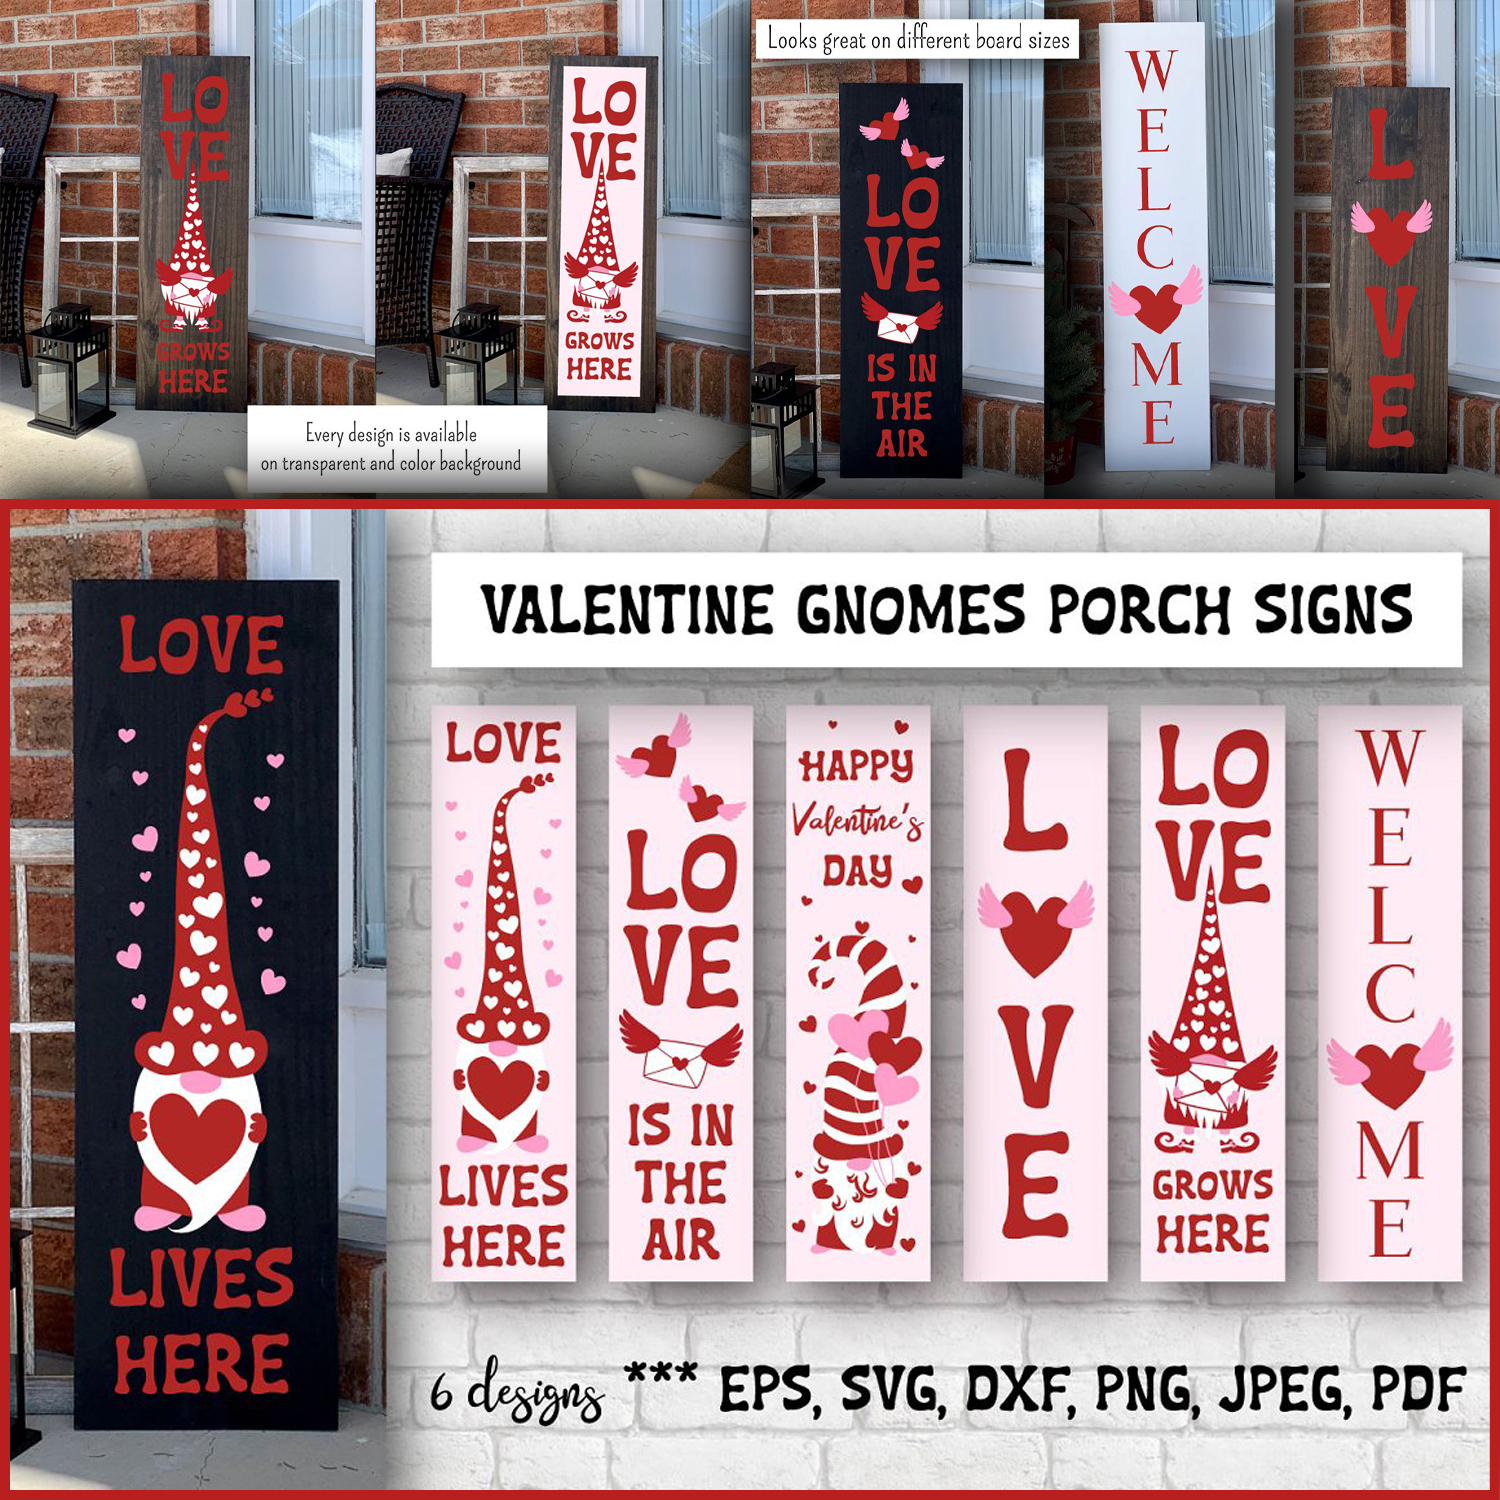 Images with valentine gnomes porch signs.